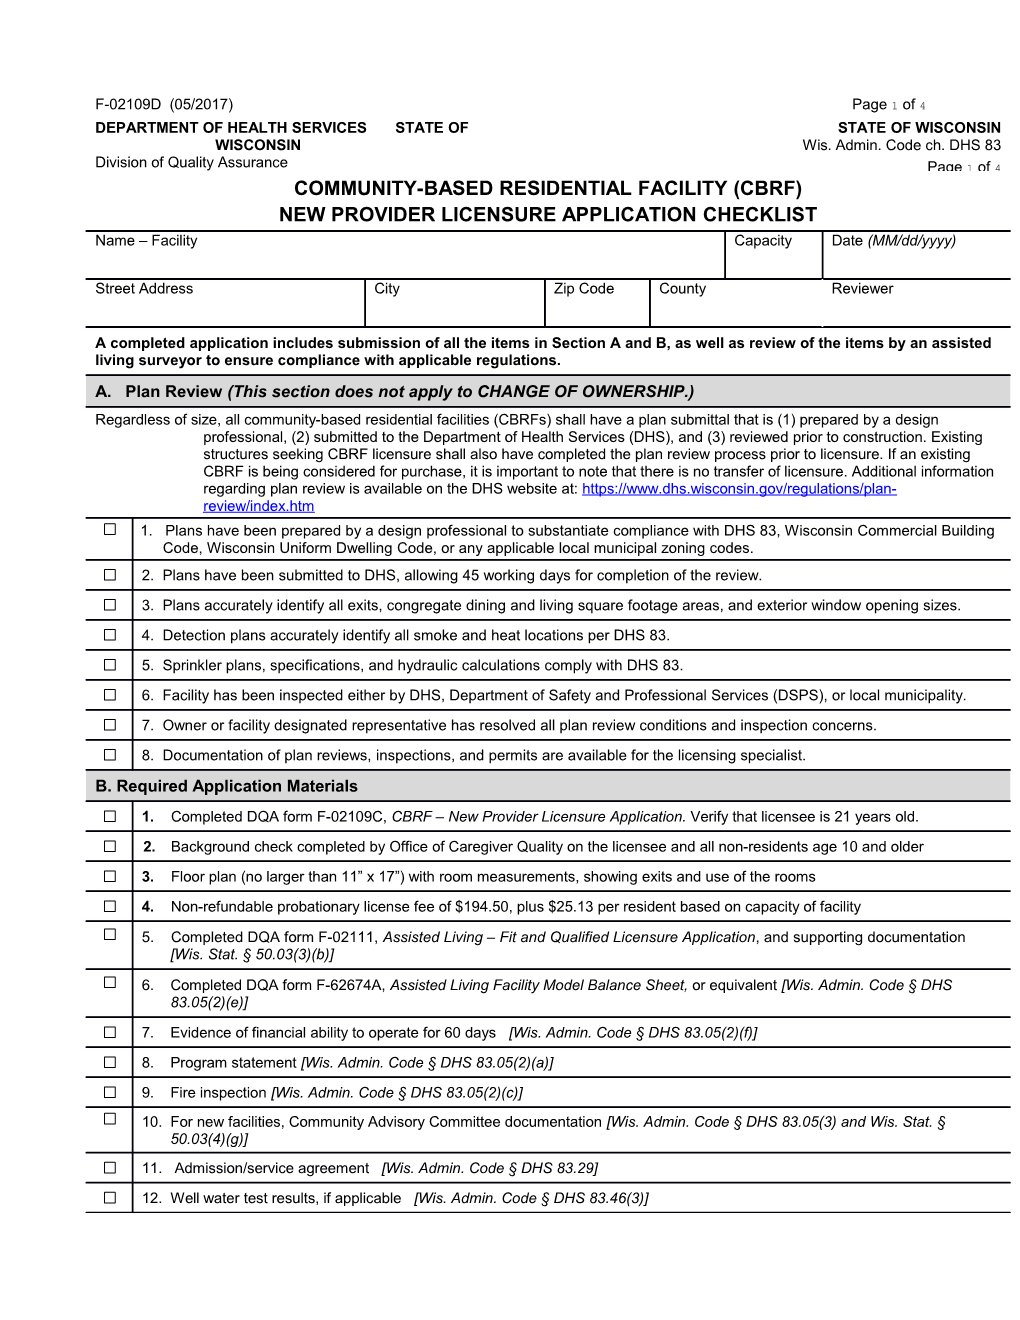 Community-Based Residential Facility - New Provider Licensure Application Checklist, F-02109D